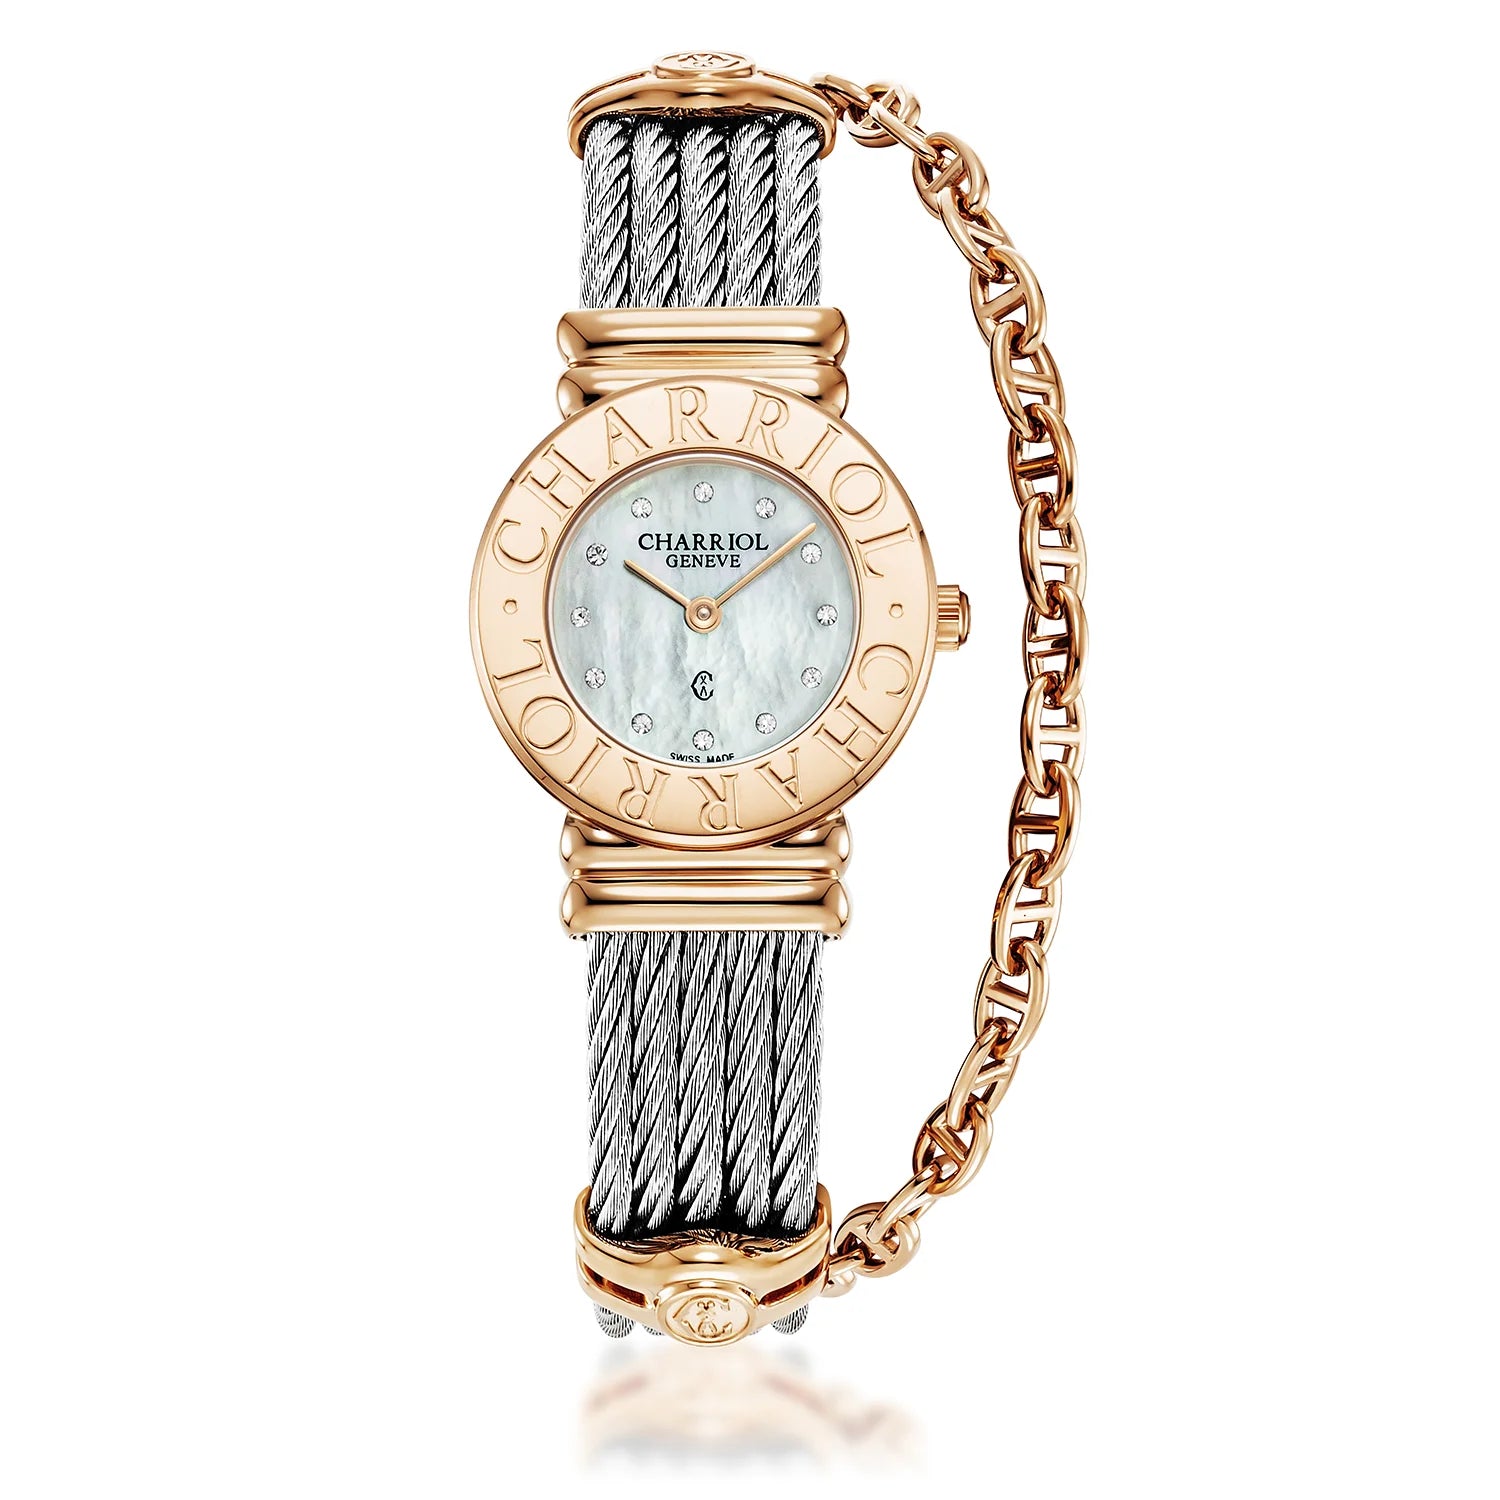 St Tropez Icon 24.5mm Watch Rose Gold PVD, Steel Cable, Charriol Bezel and 12 Diamonds White MOP Dial - Charriol Geneve -  Watch